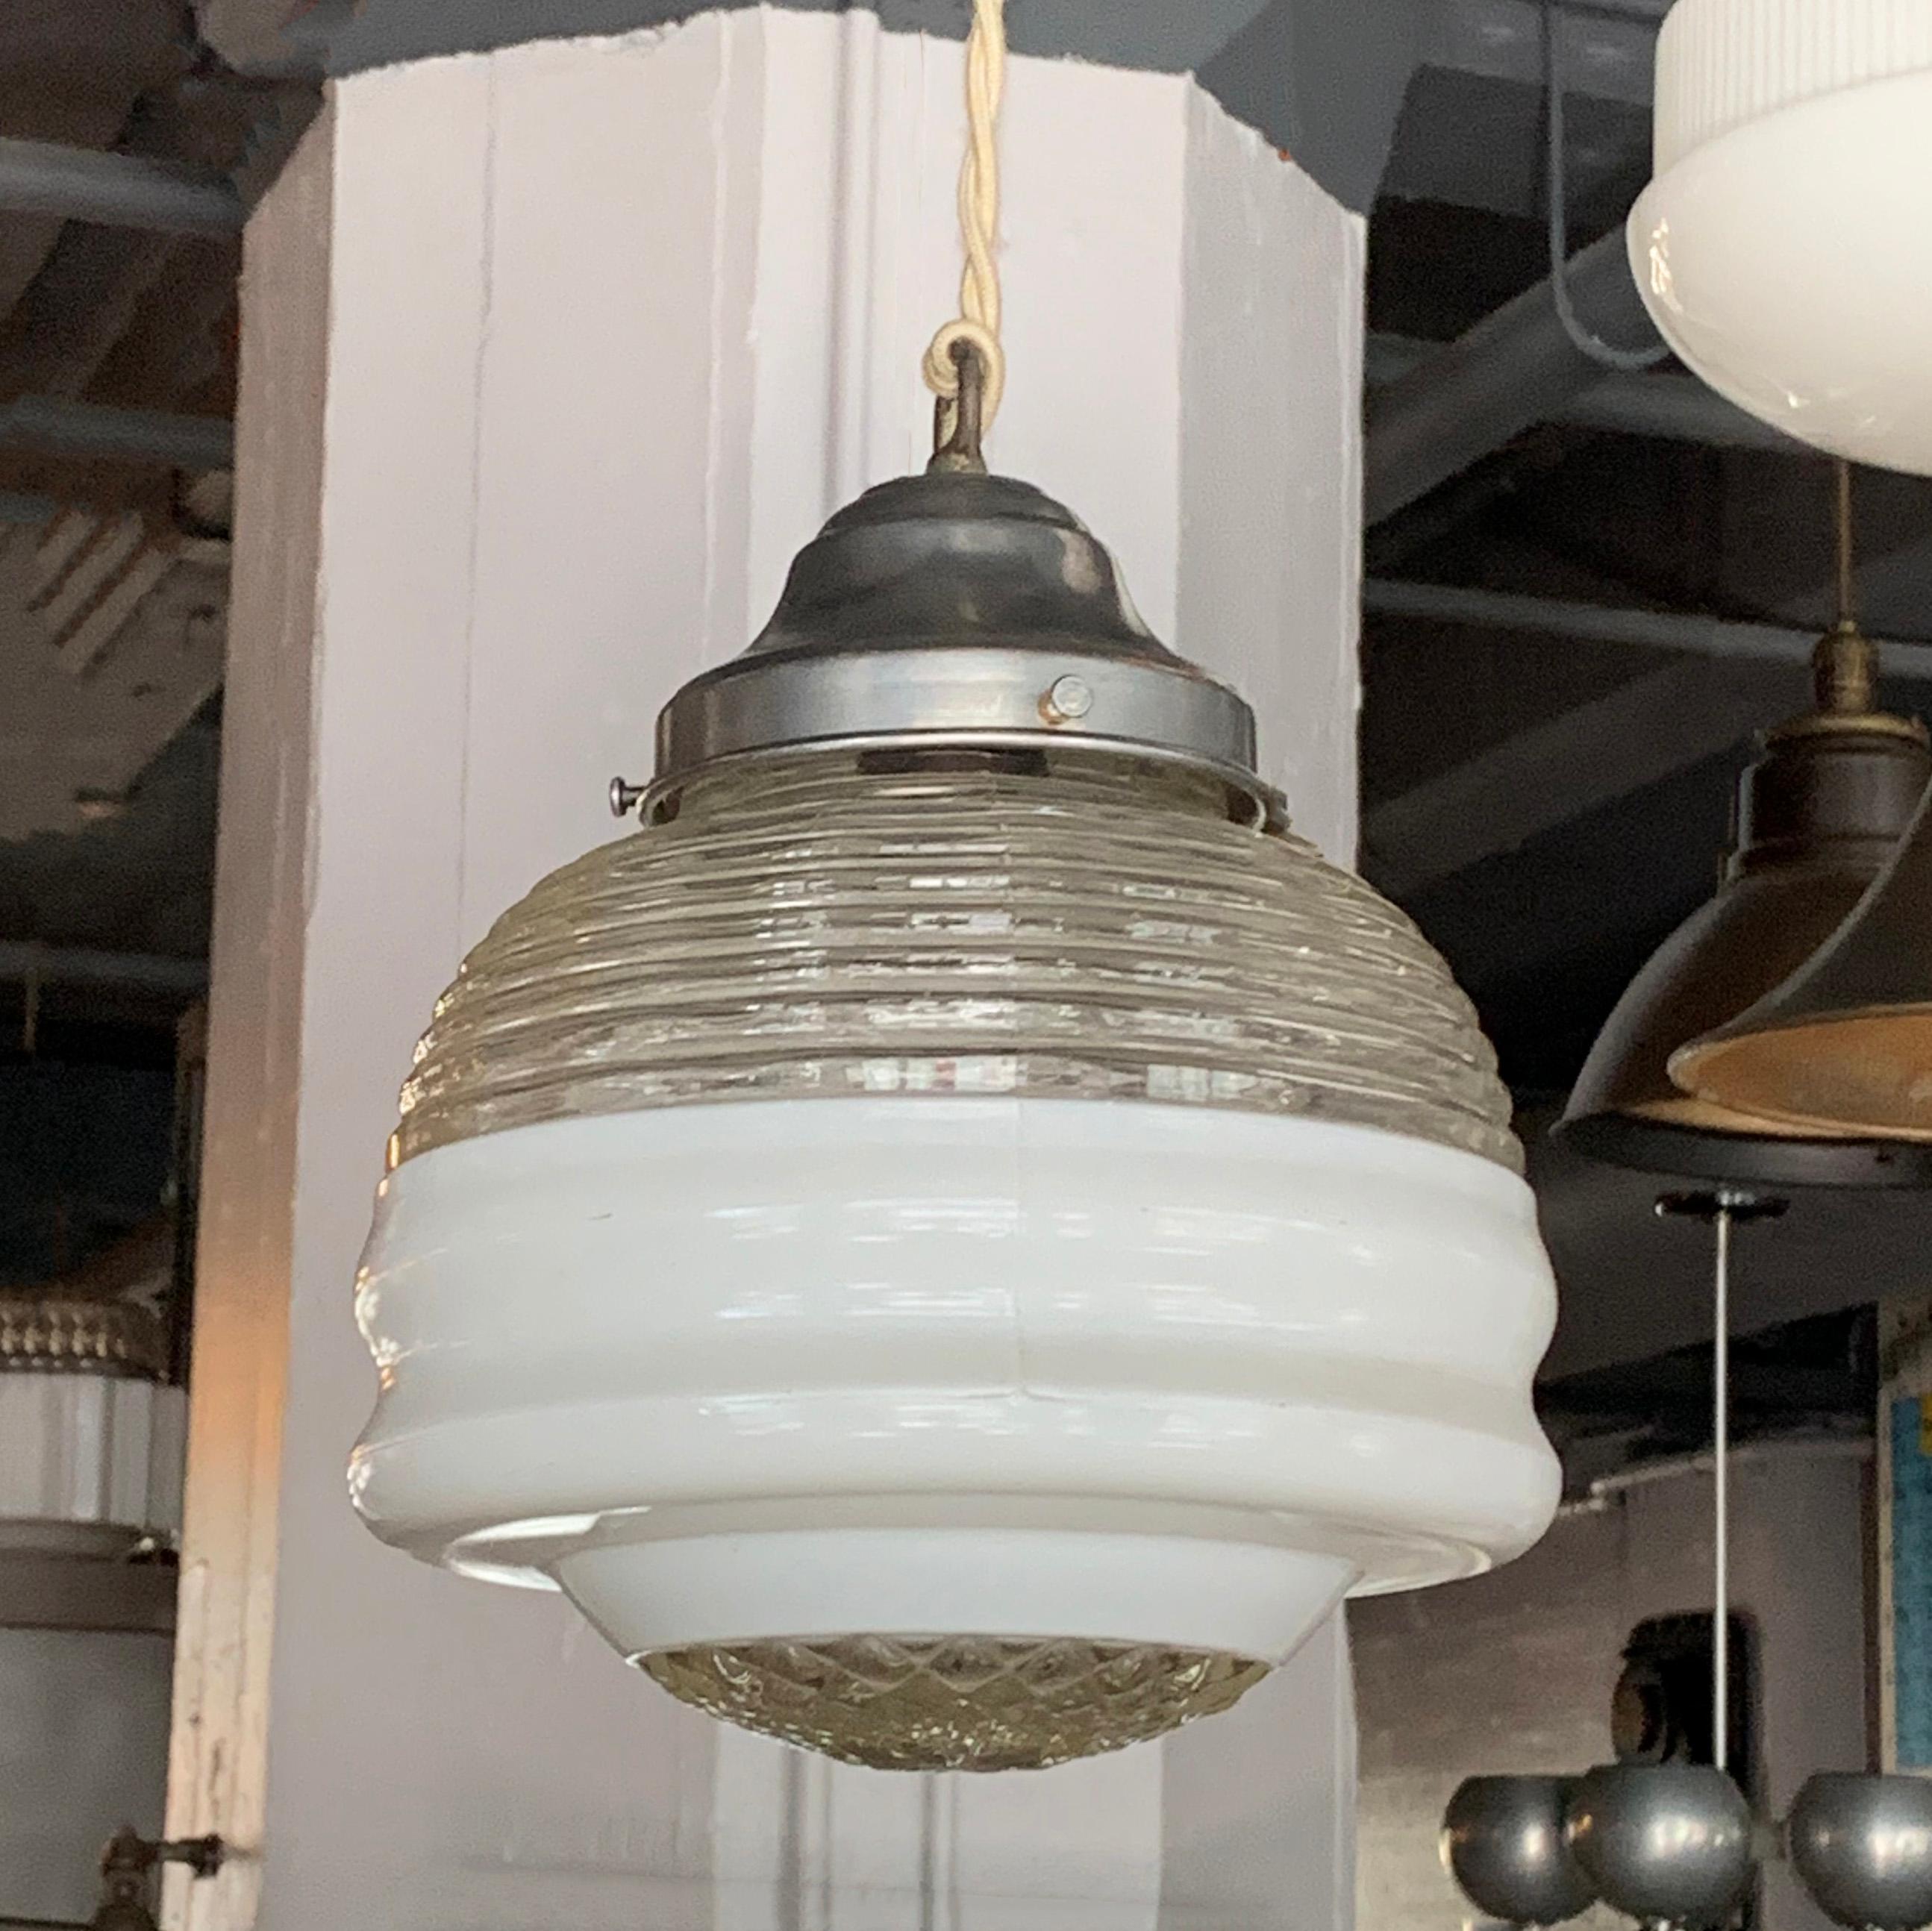 Art Deco pendant light with a layered shade of ribbed, frosted and cut glass with aluminum fitter is newly wired with 48 inches of braided beige cord to accept a 150 watt bulb.